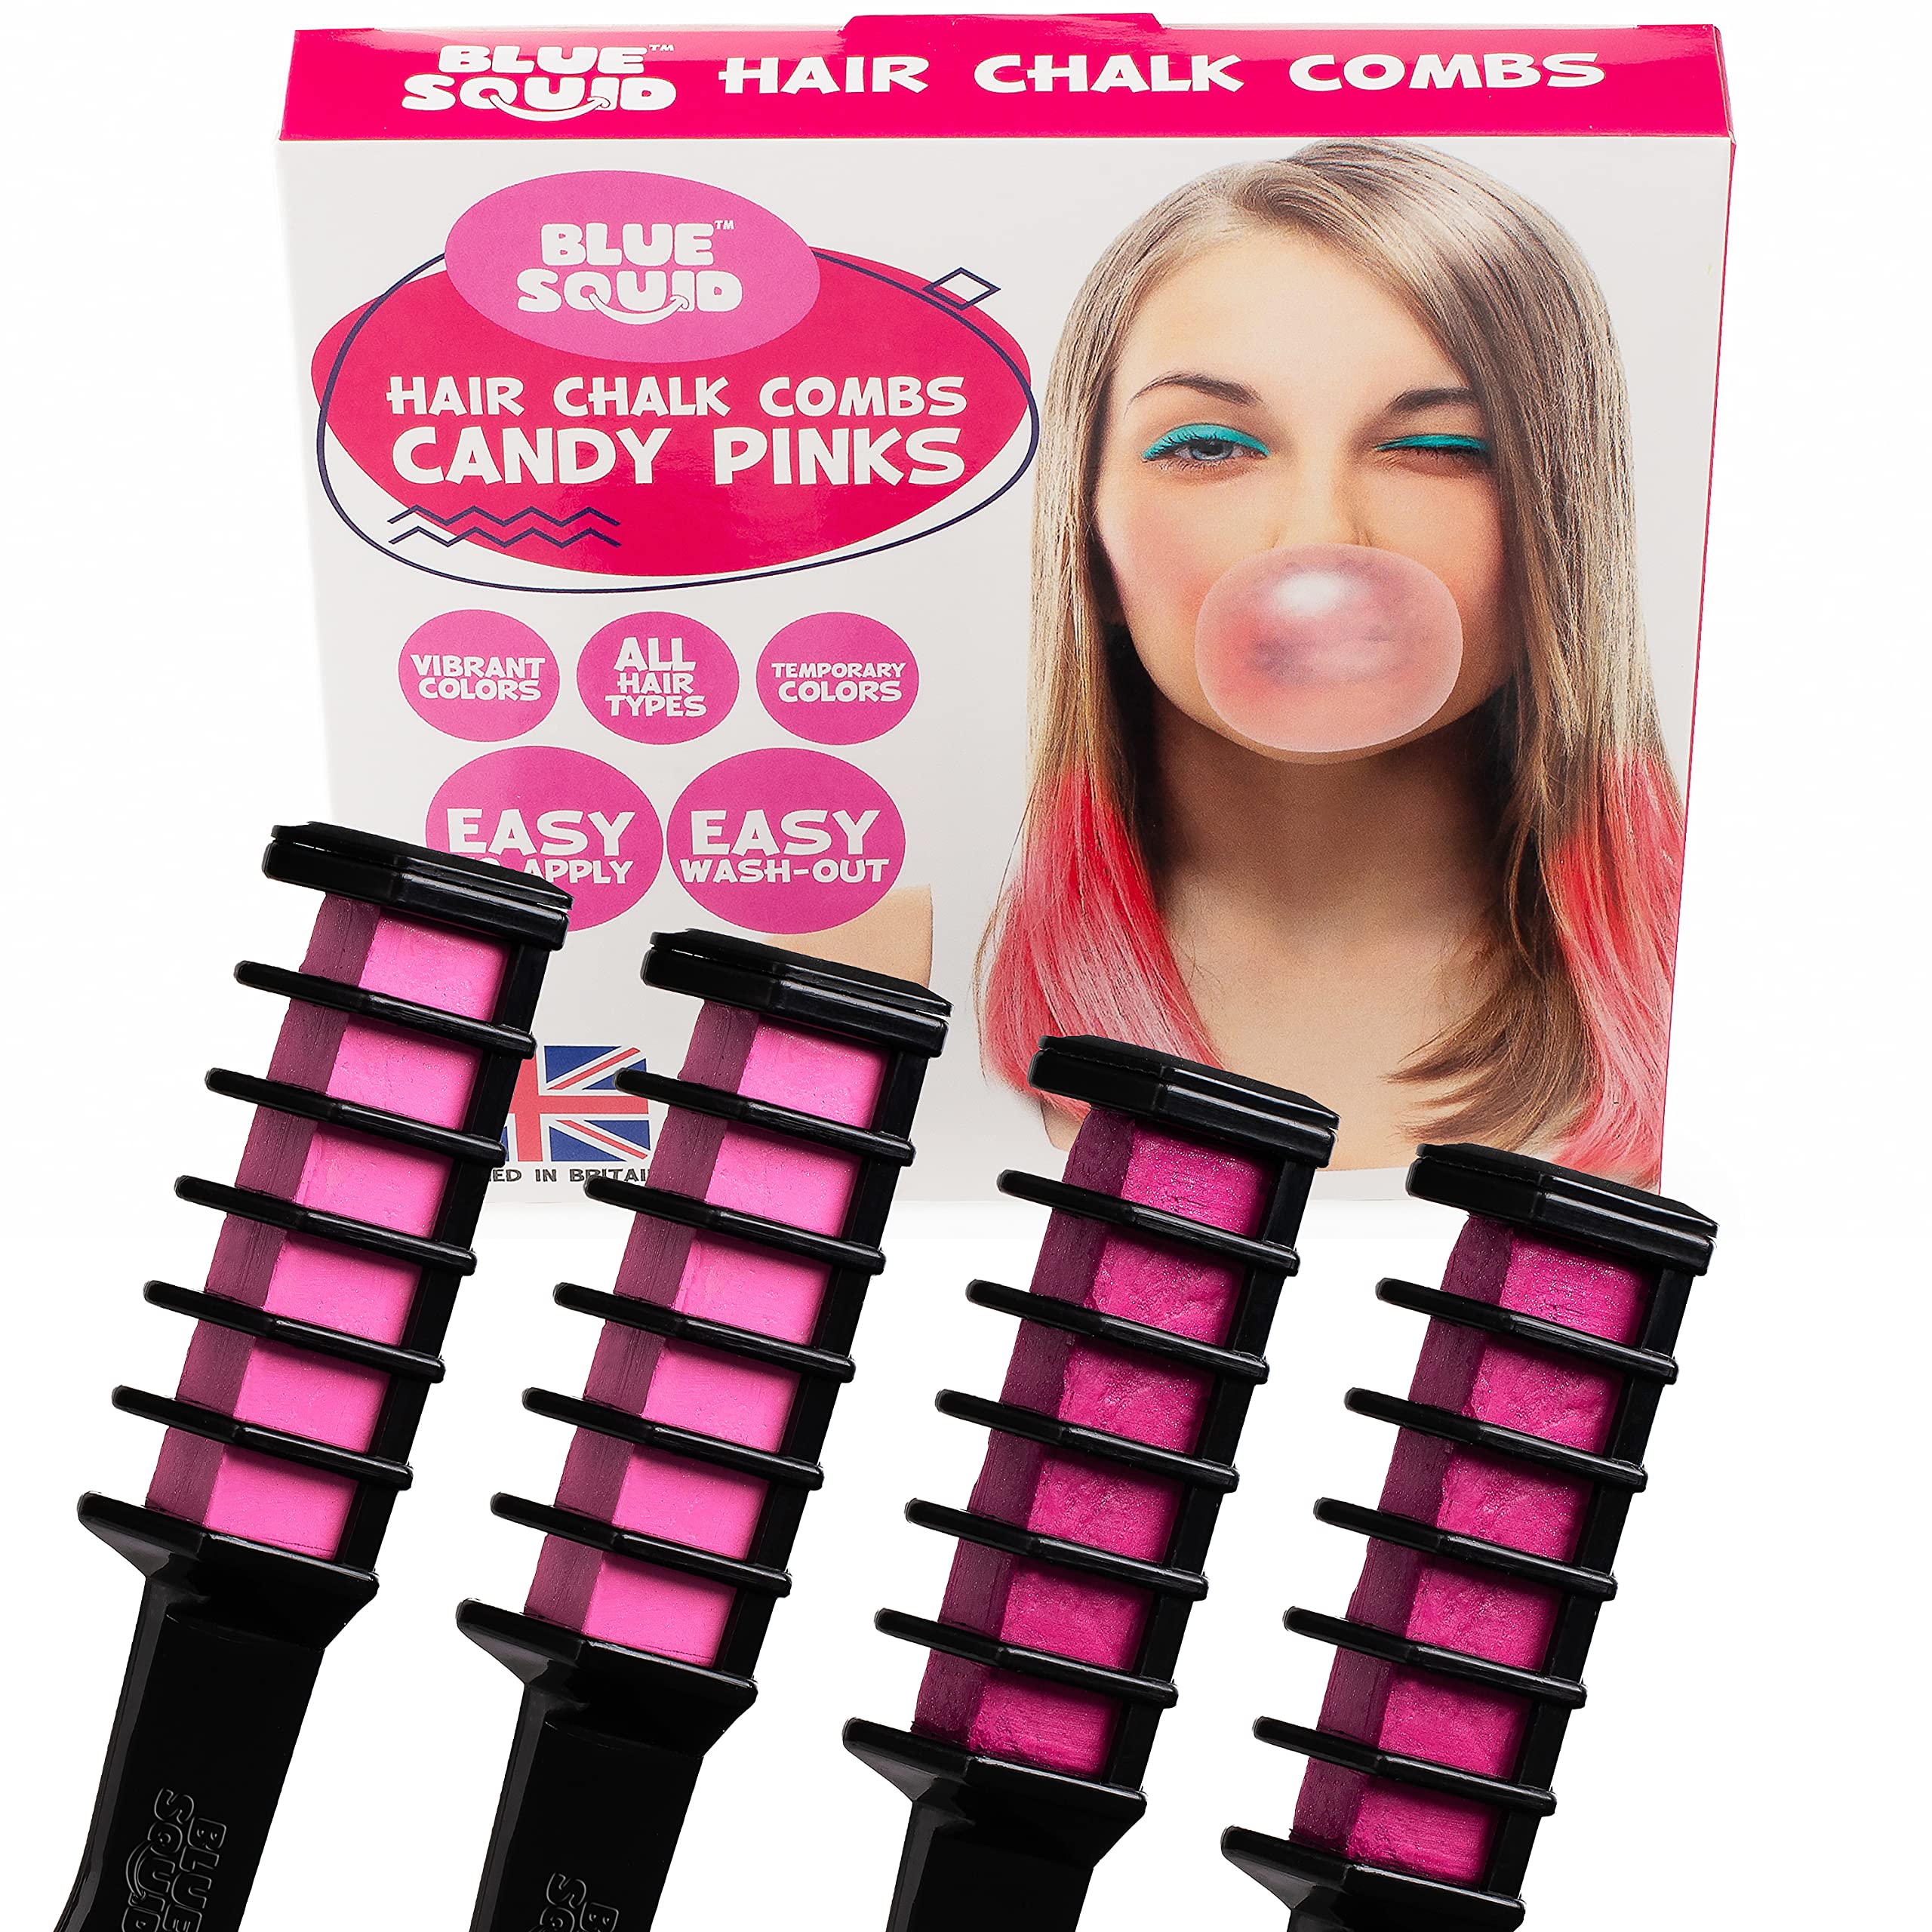 Hair Chalk for Girls, Temporary Hair Color for Kids Washable Hair Dye  Accessories Rainbow Comb Kit for Age 4 5 6 7 8 9 10